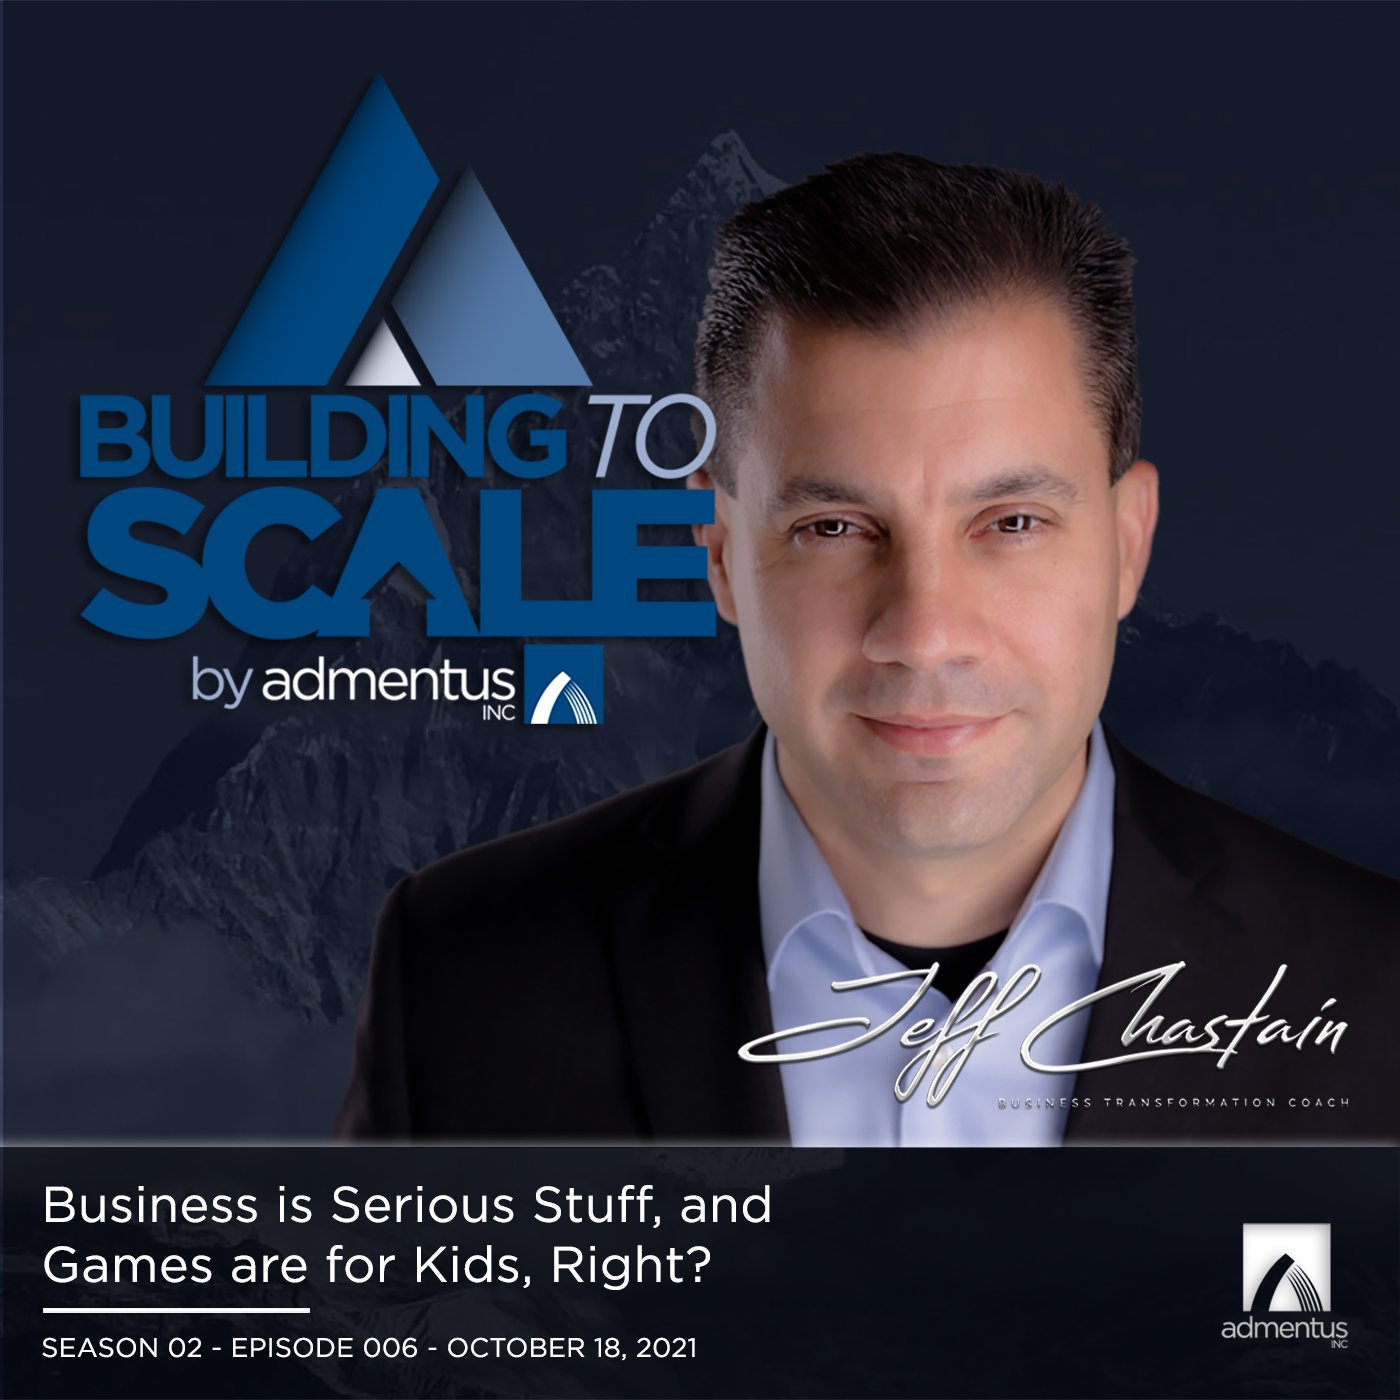 Business is Serious Stuff and Games are for Kids, Right?